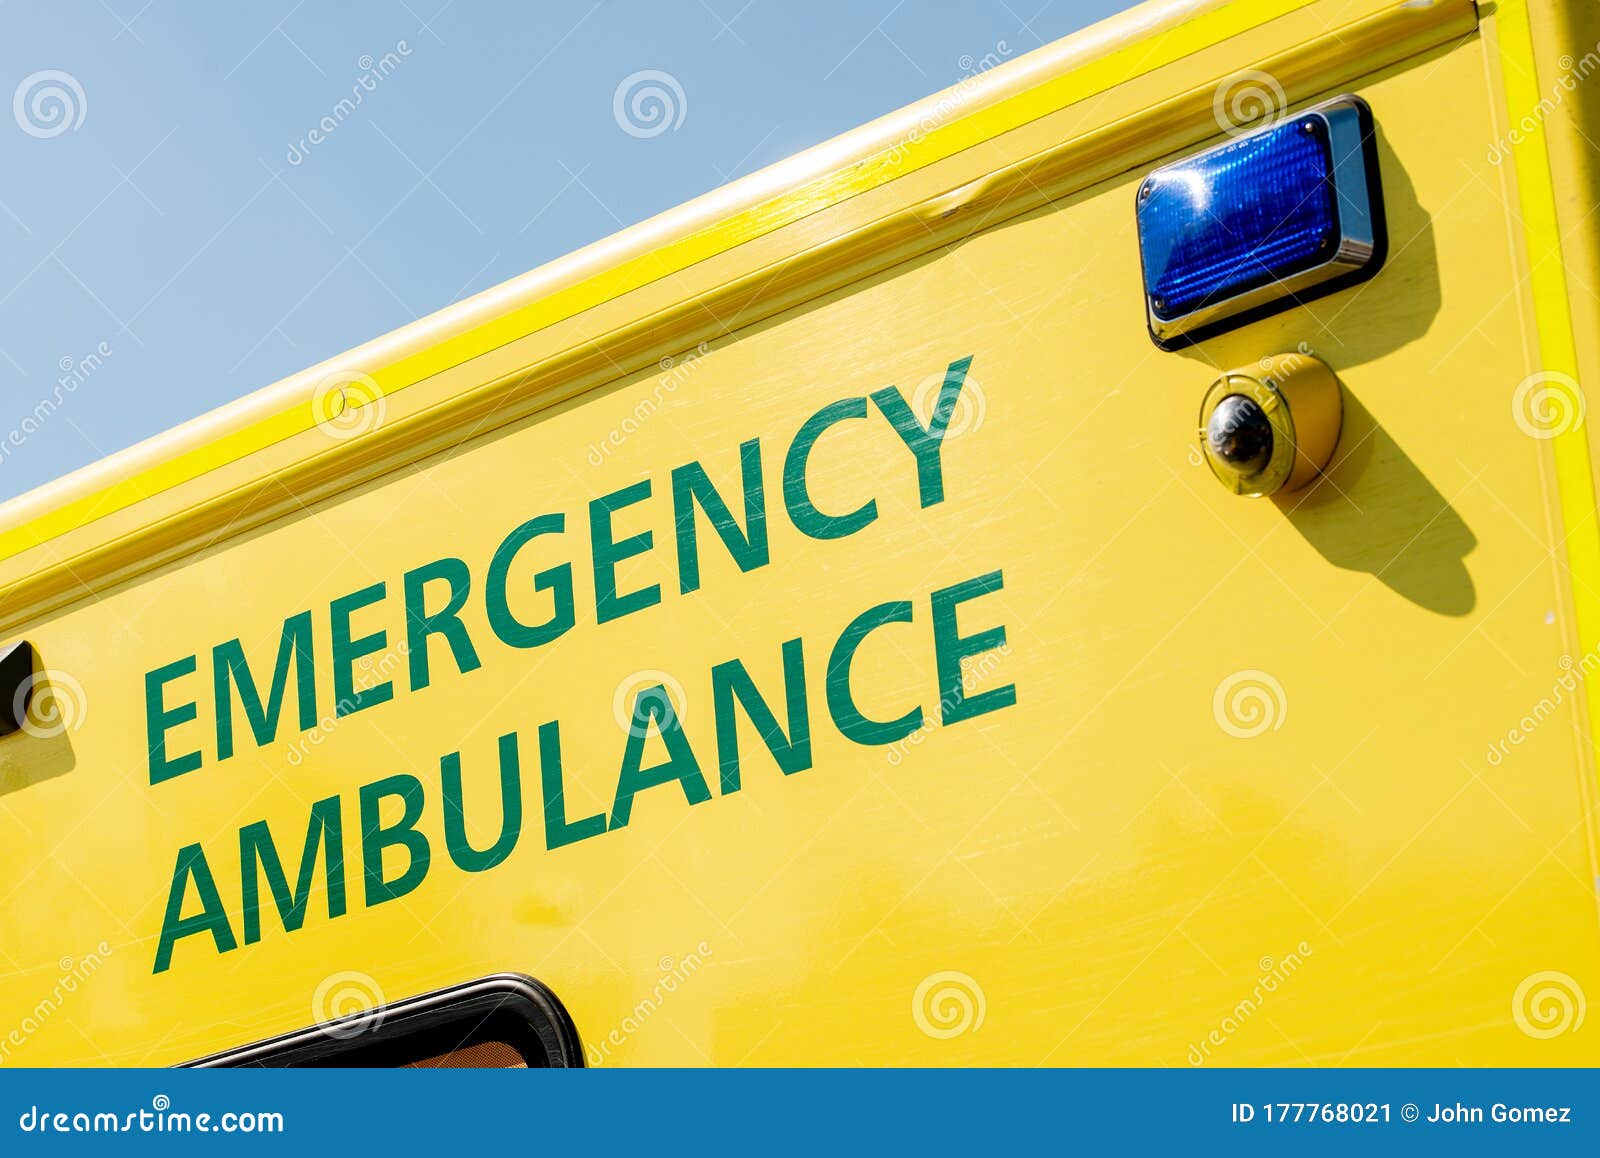 angled view of emergency ambulance sign on yellow nhs vehicle.